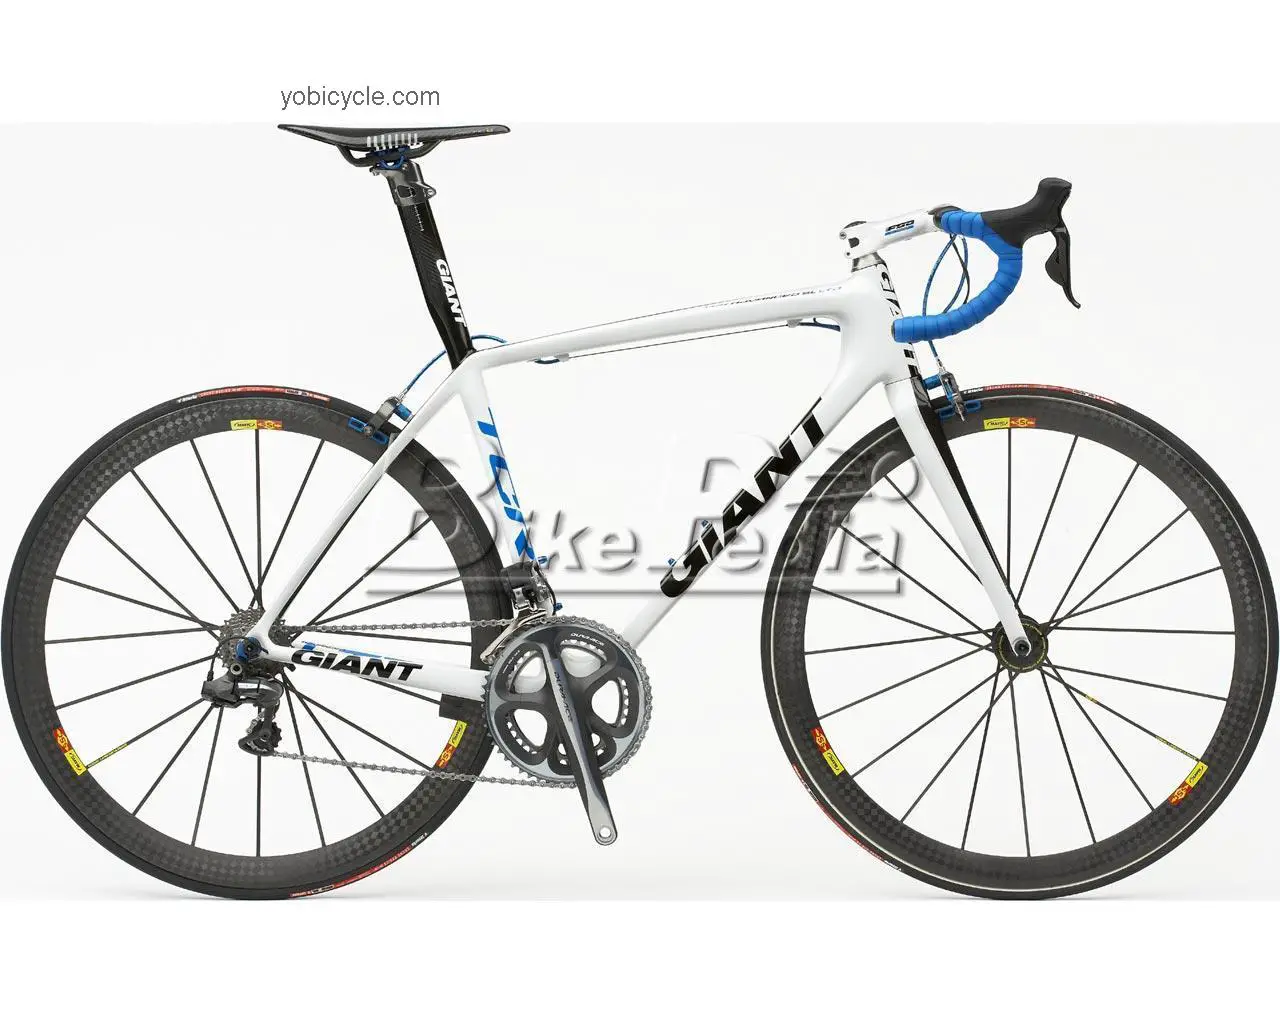 Giant TCR Advanced SL Limited 2009 comparison online with competitors